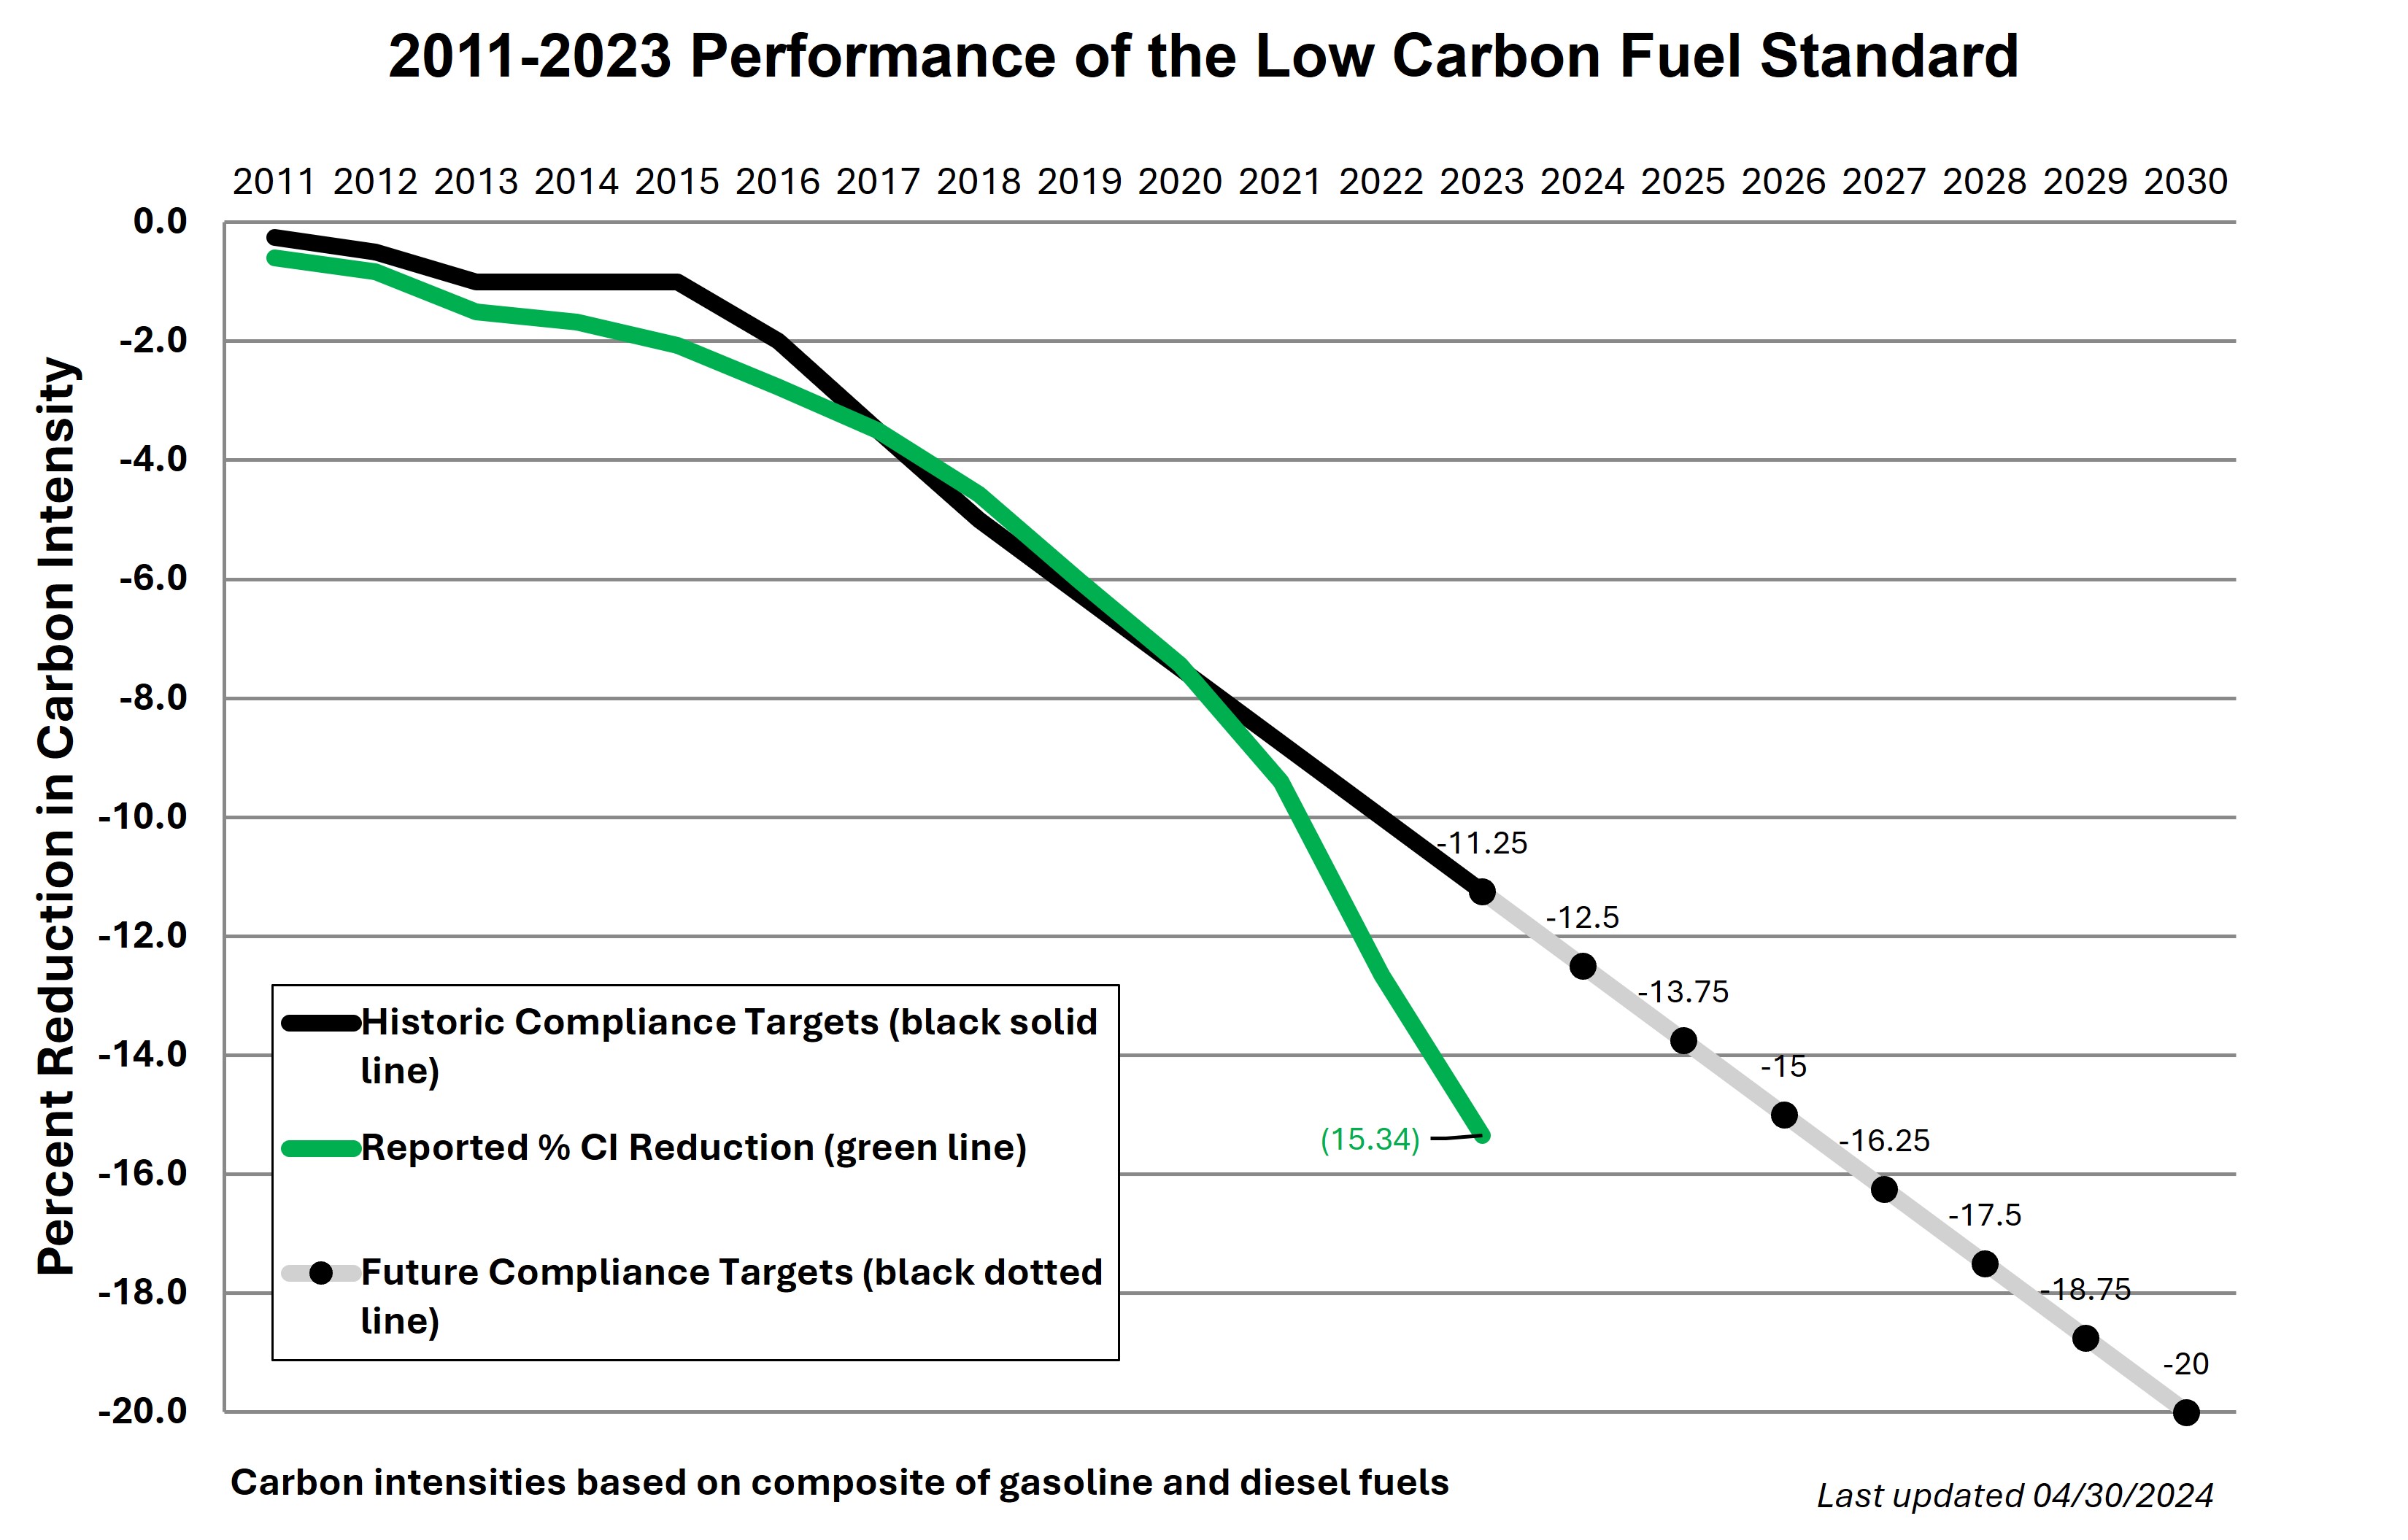 2011 - 2023 Performance of the Low Carbon Fuel Standard